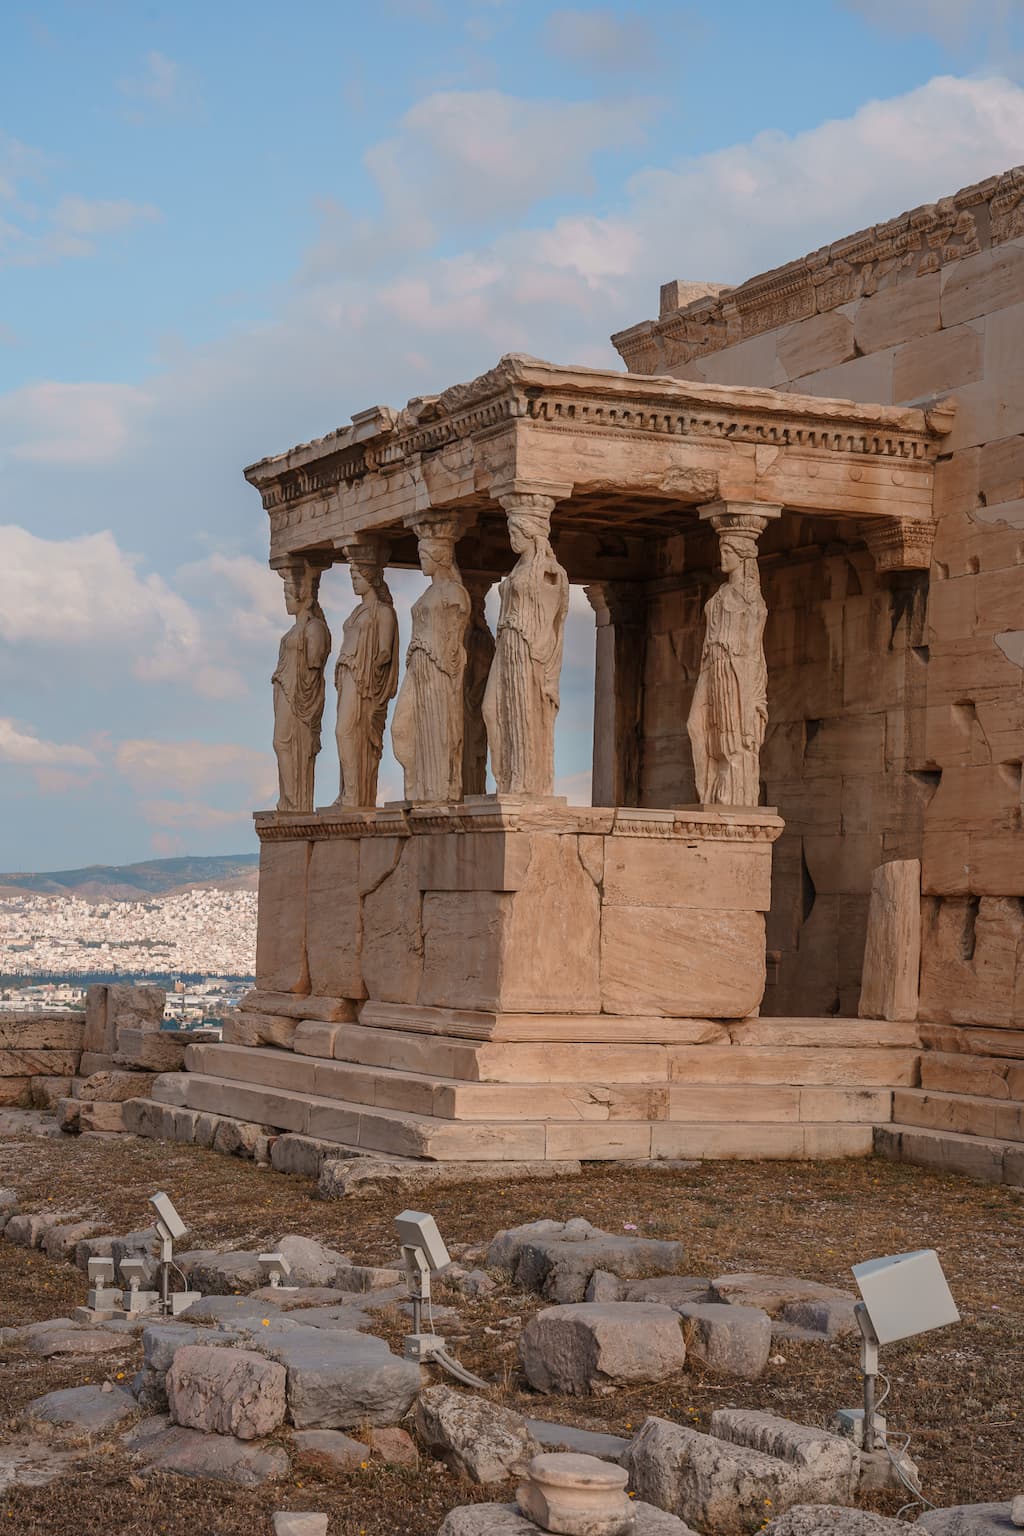 The Acropolis Hill is a must see on your 4 days itinerary in Athens.